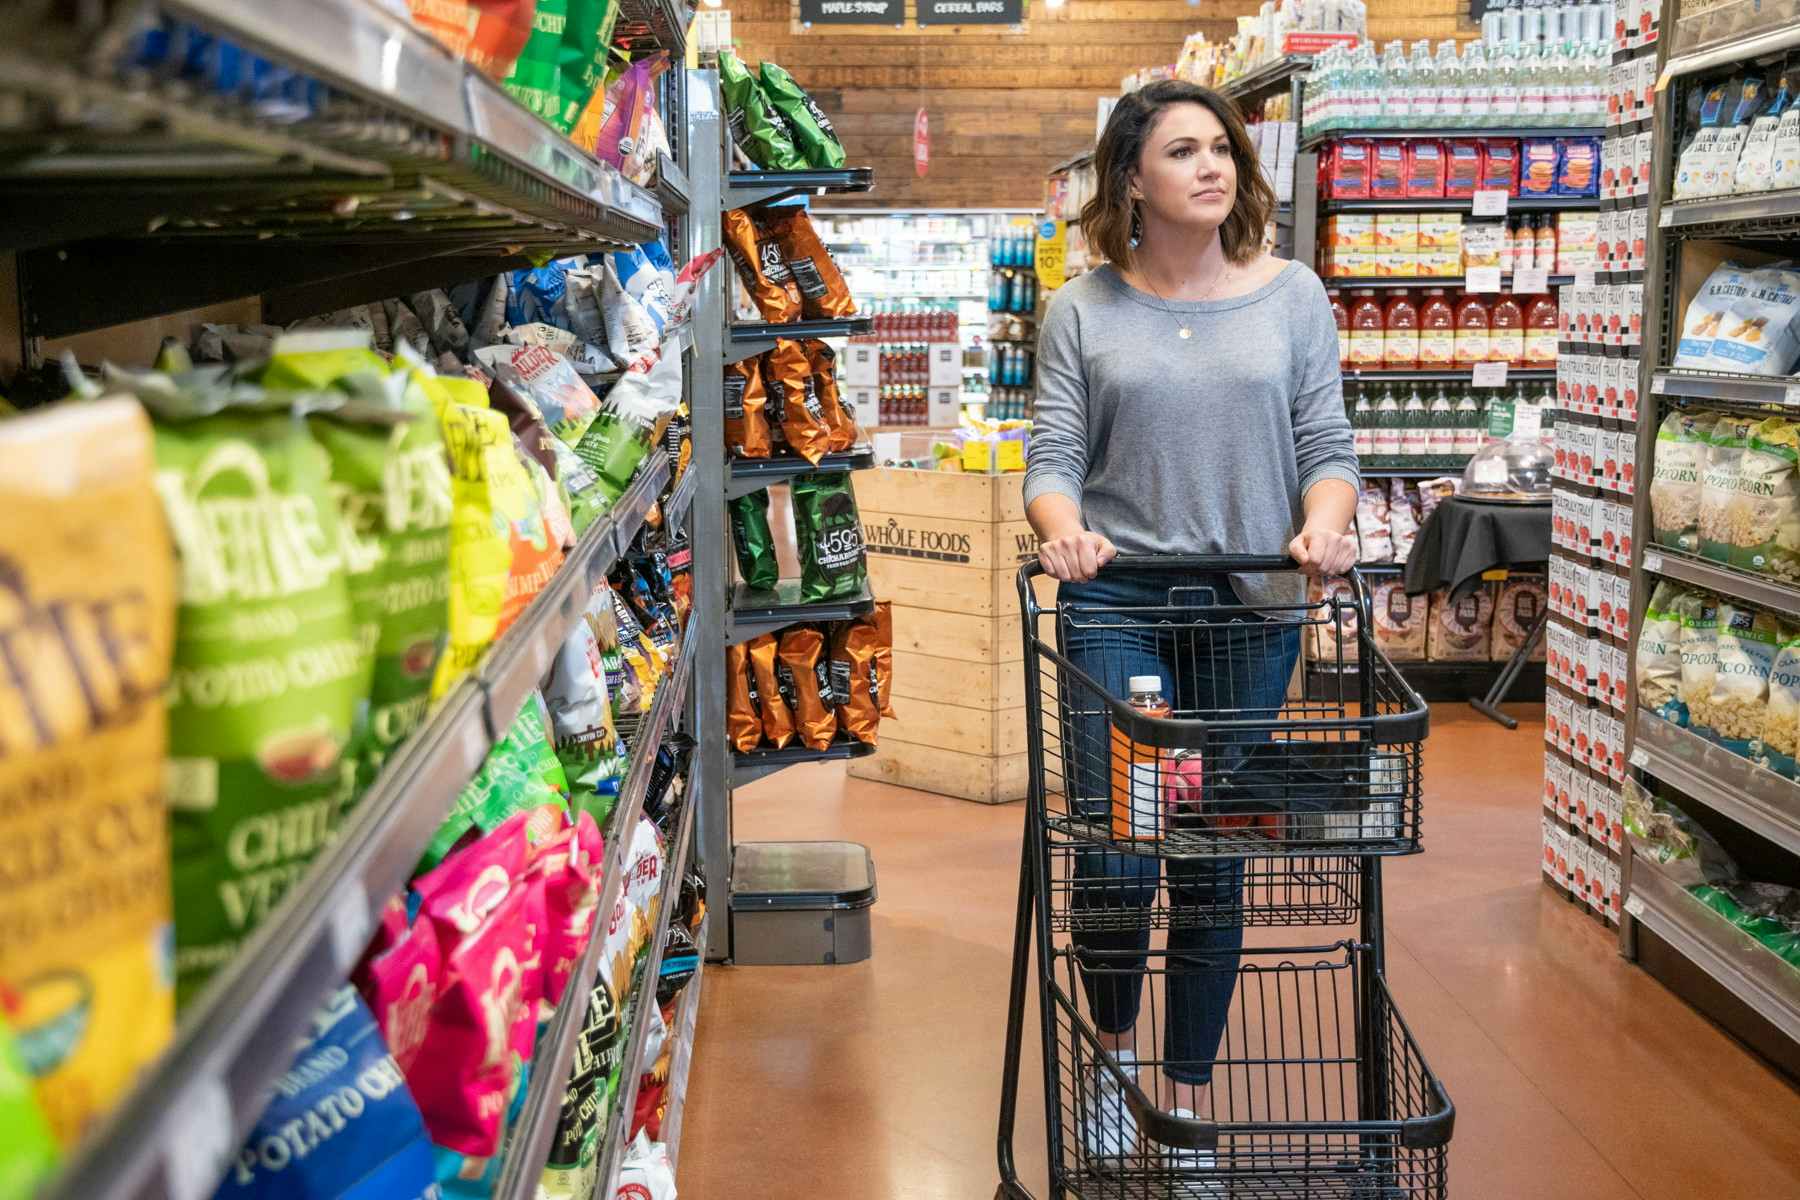 Personal Grocery Shopper Jobs - 7+ Best Companies Hiring Now